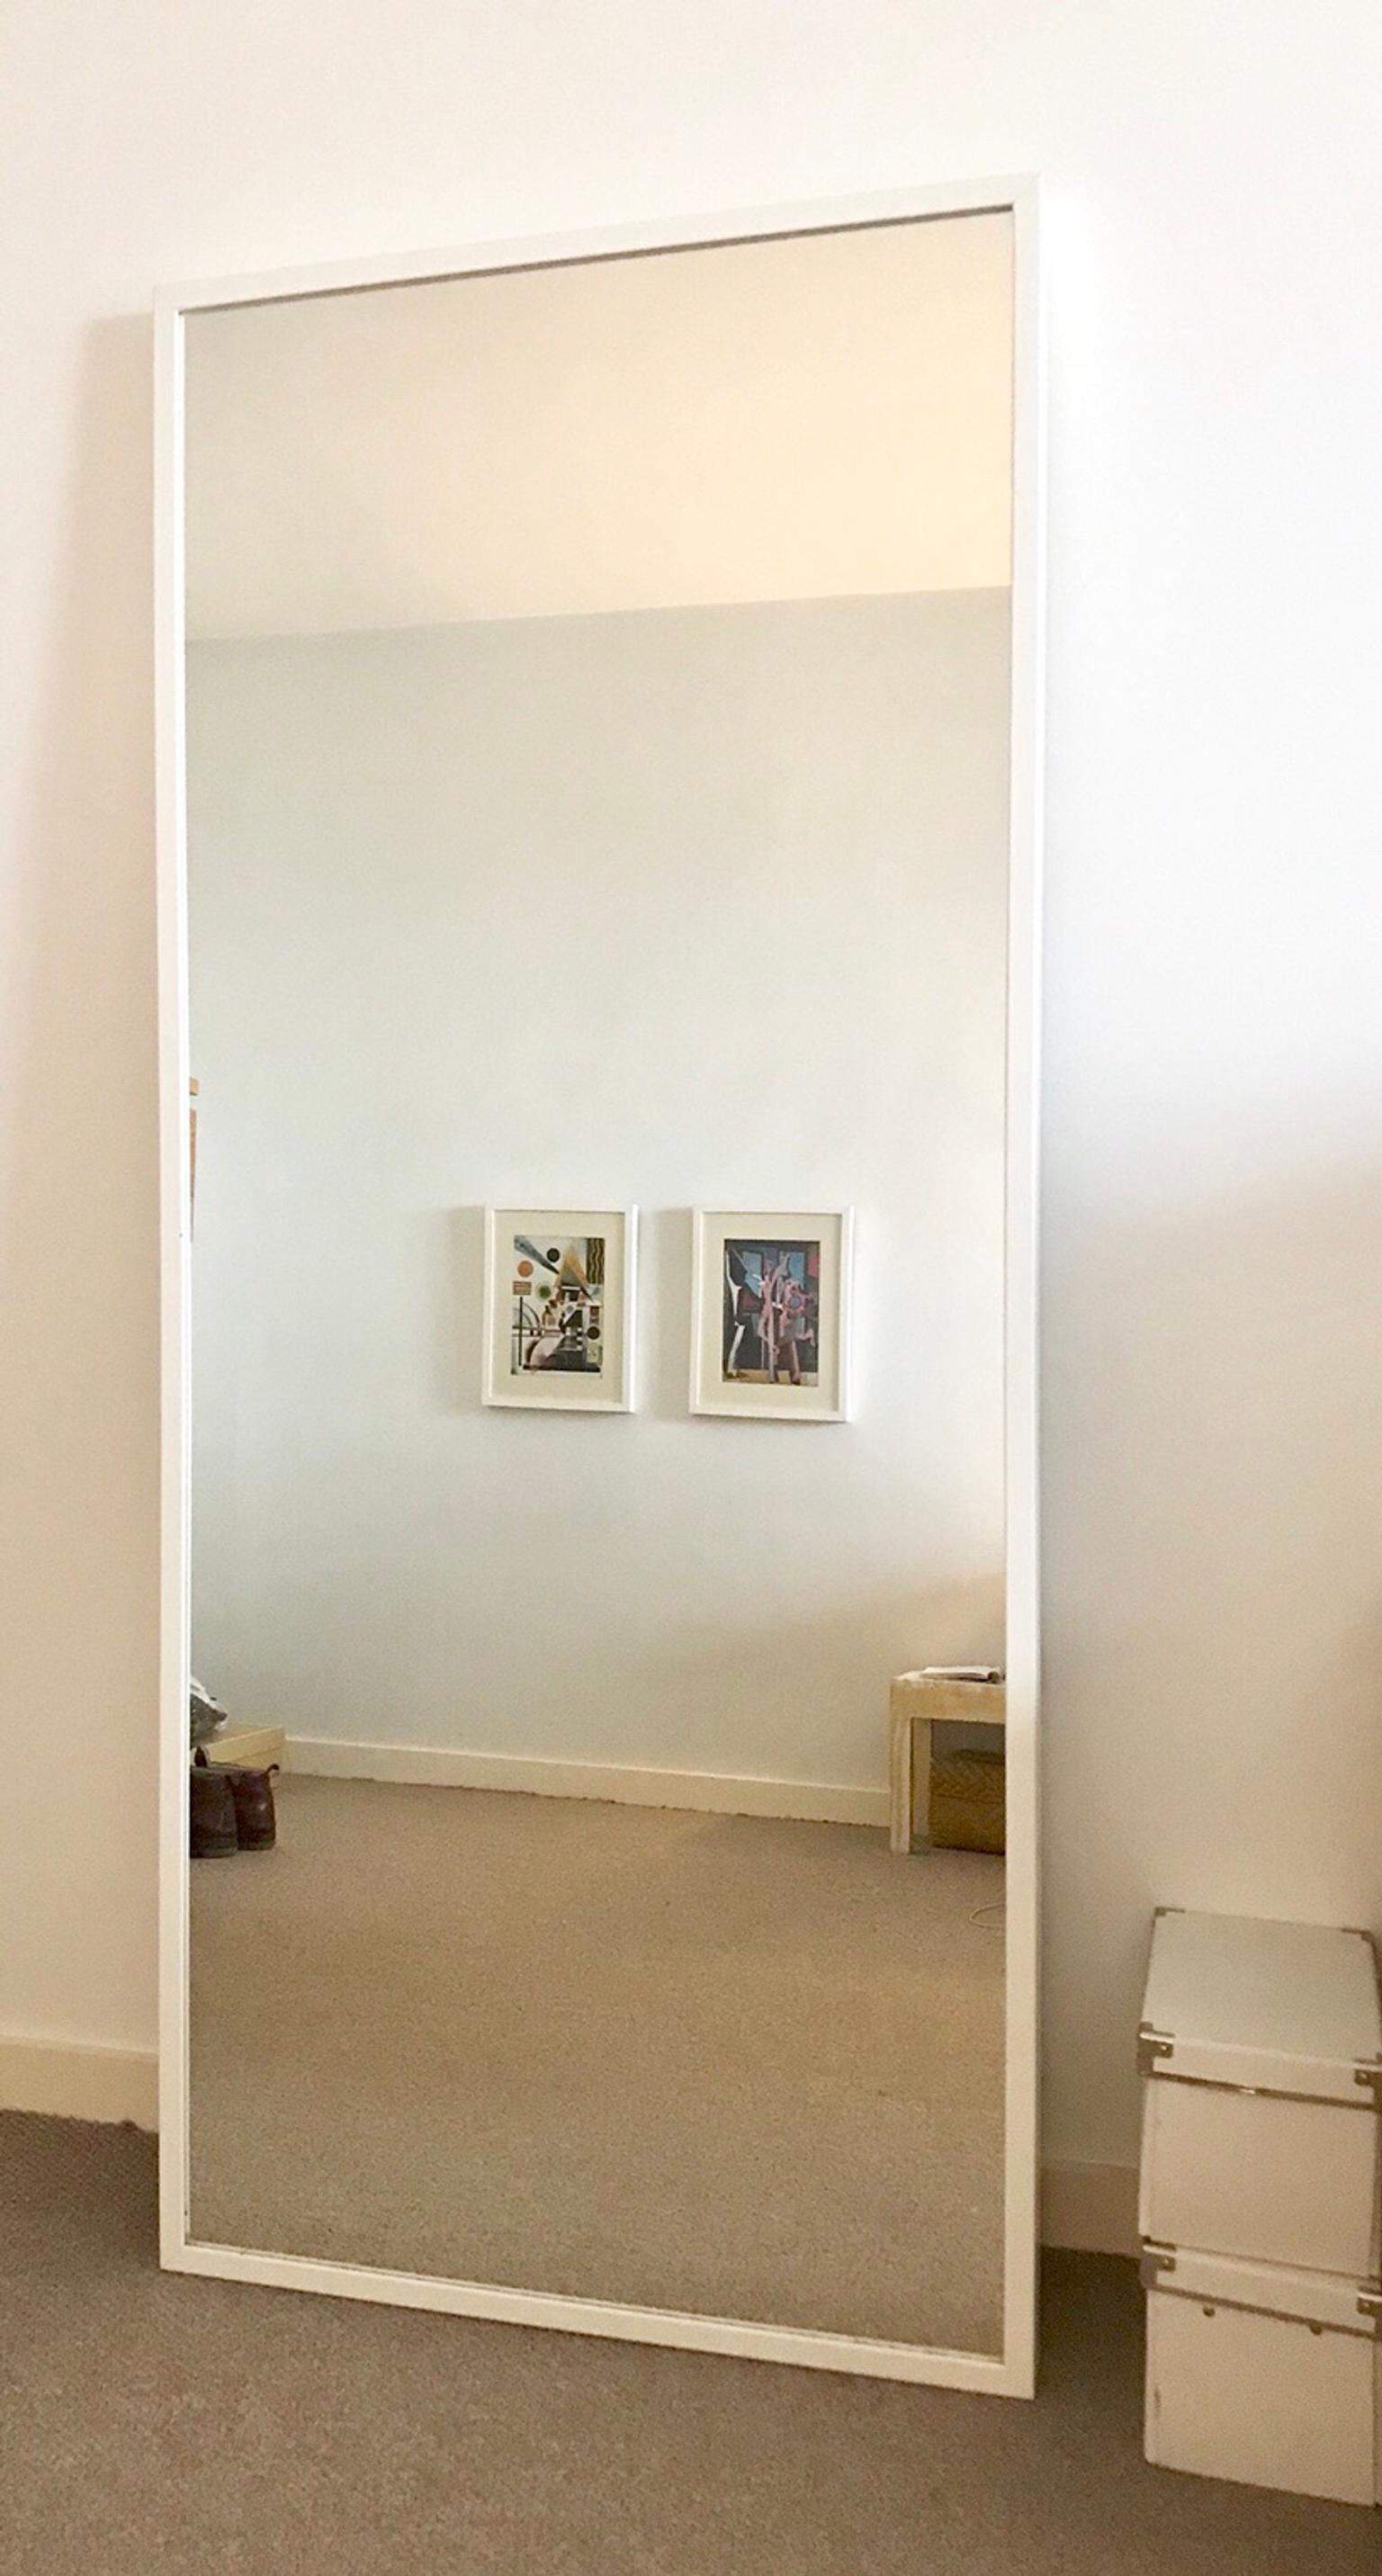 Ikea Mirror 65x 150 cm in NW3 Camden for £22.00 for sale | Shpock